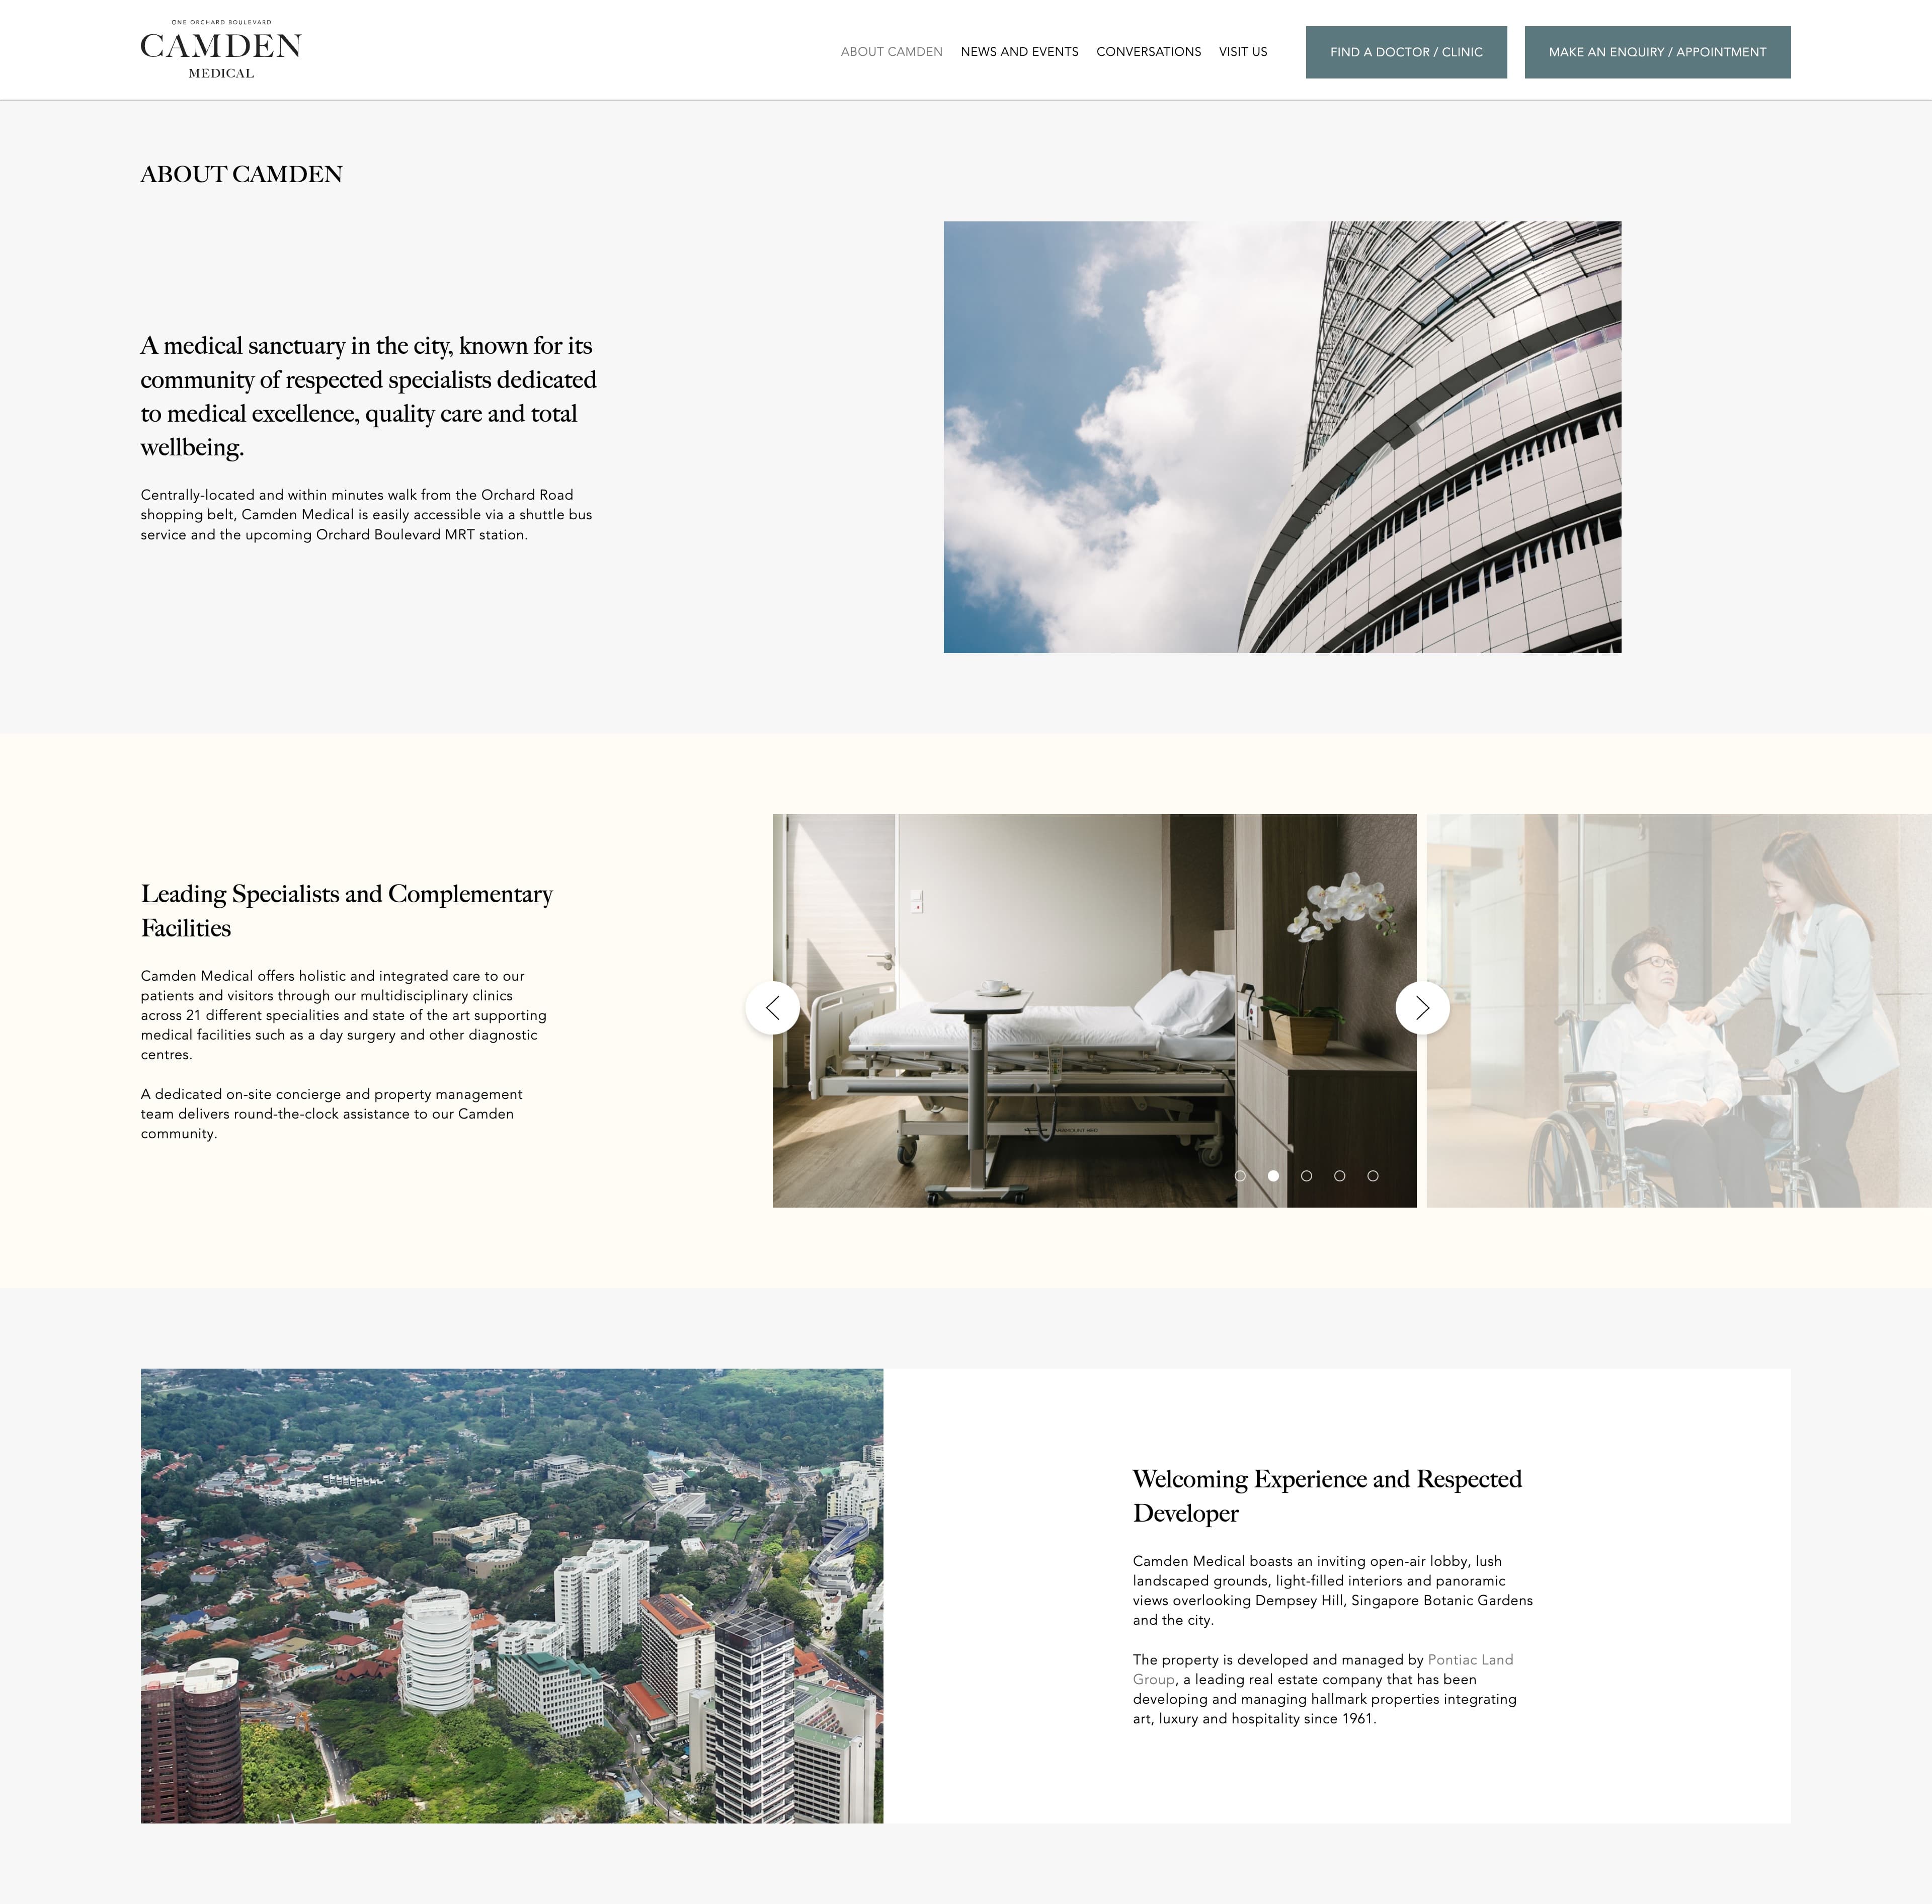 Project - Camden Medical About Page